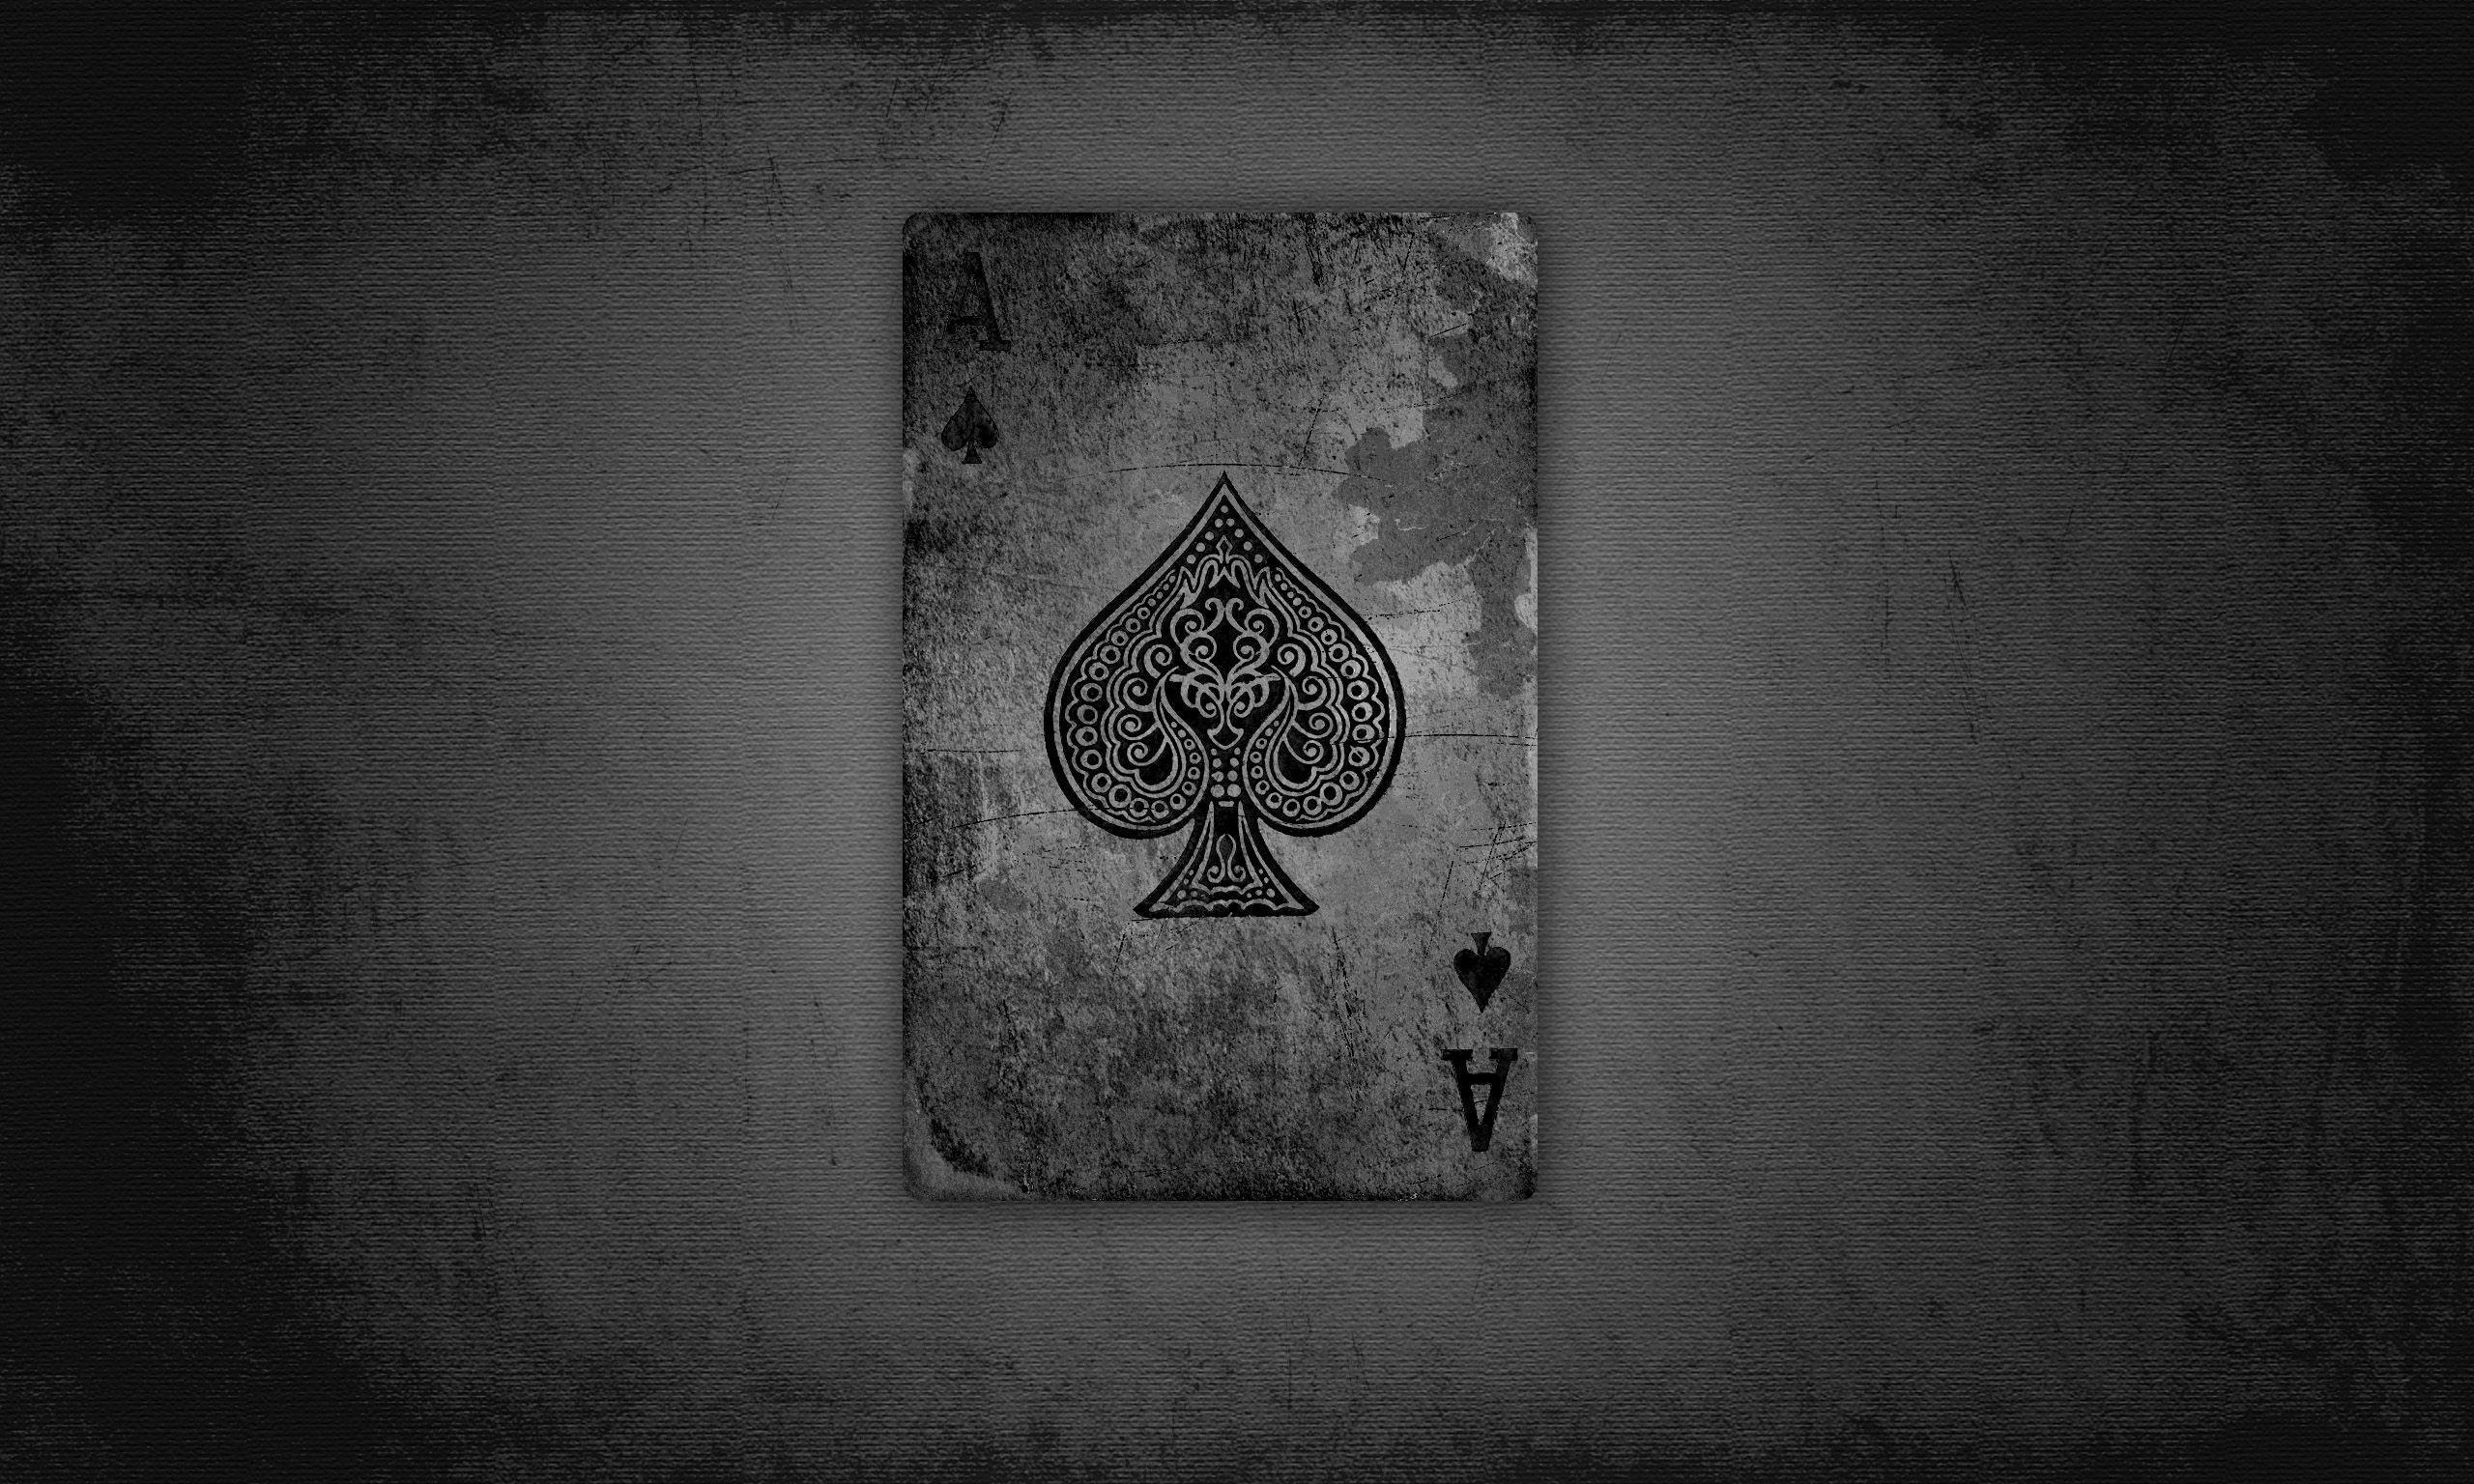 Ace Of Spades Wallpaper Pack 31: Ace Of Spades Wallpaper, 34 Ace